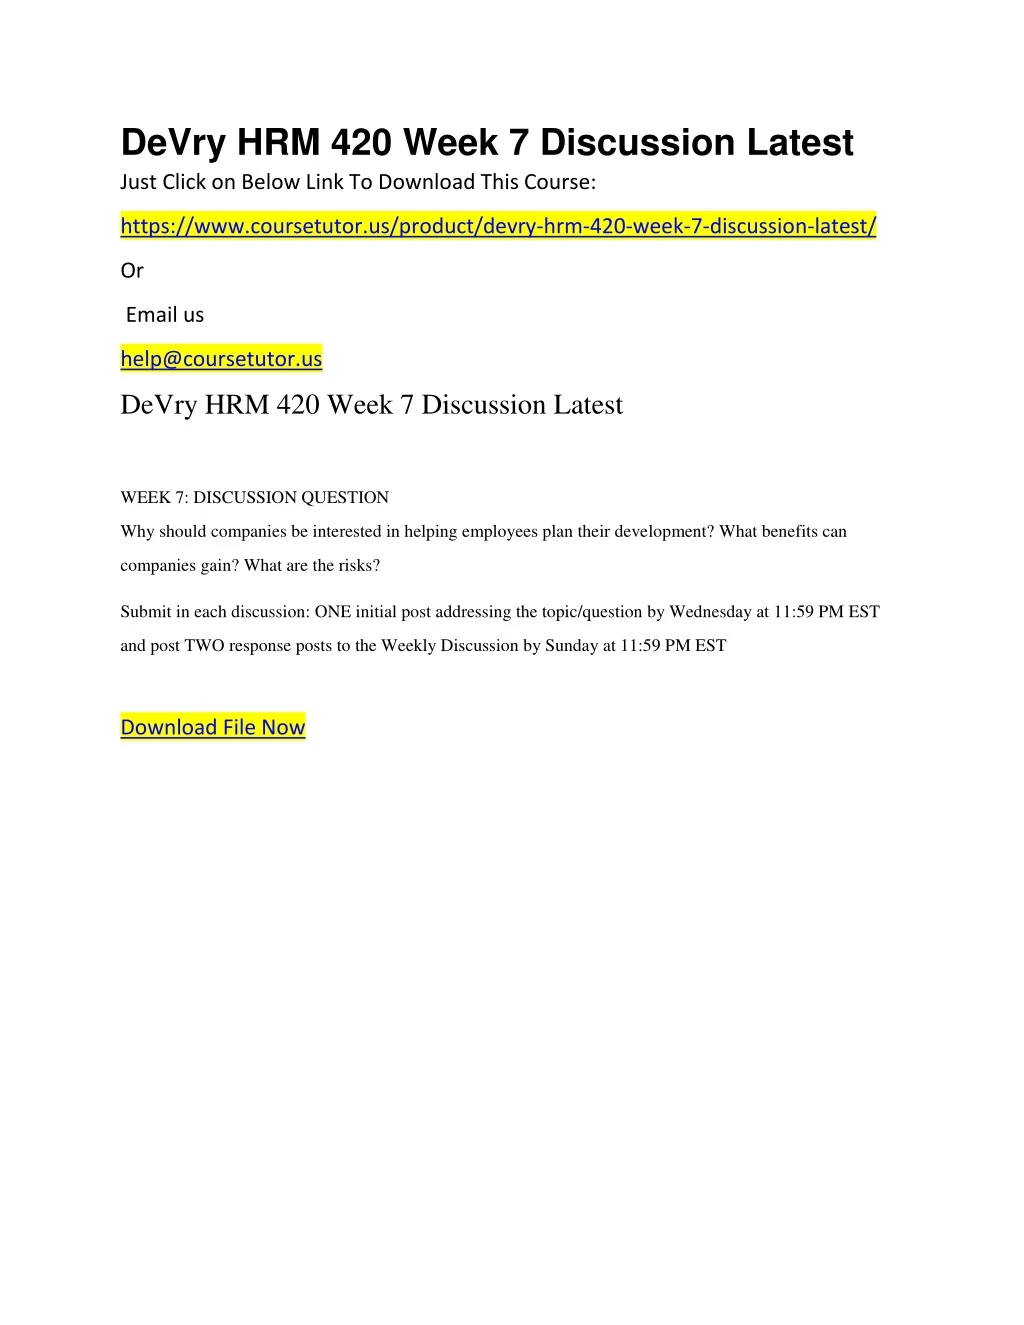 devry hrm 420 week 7 discussion latest just click